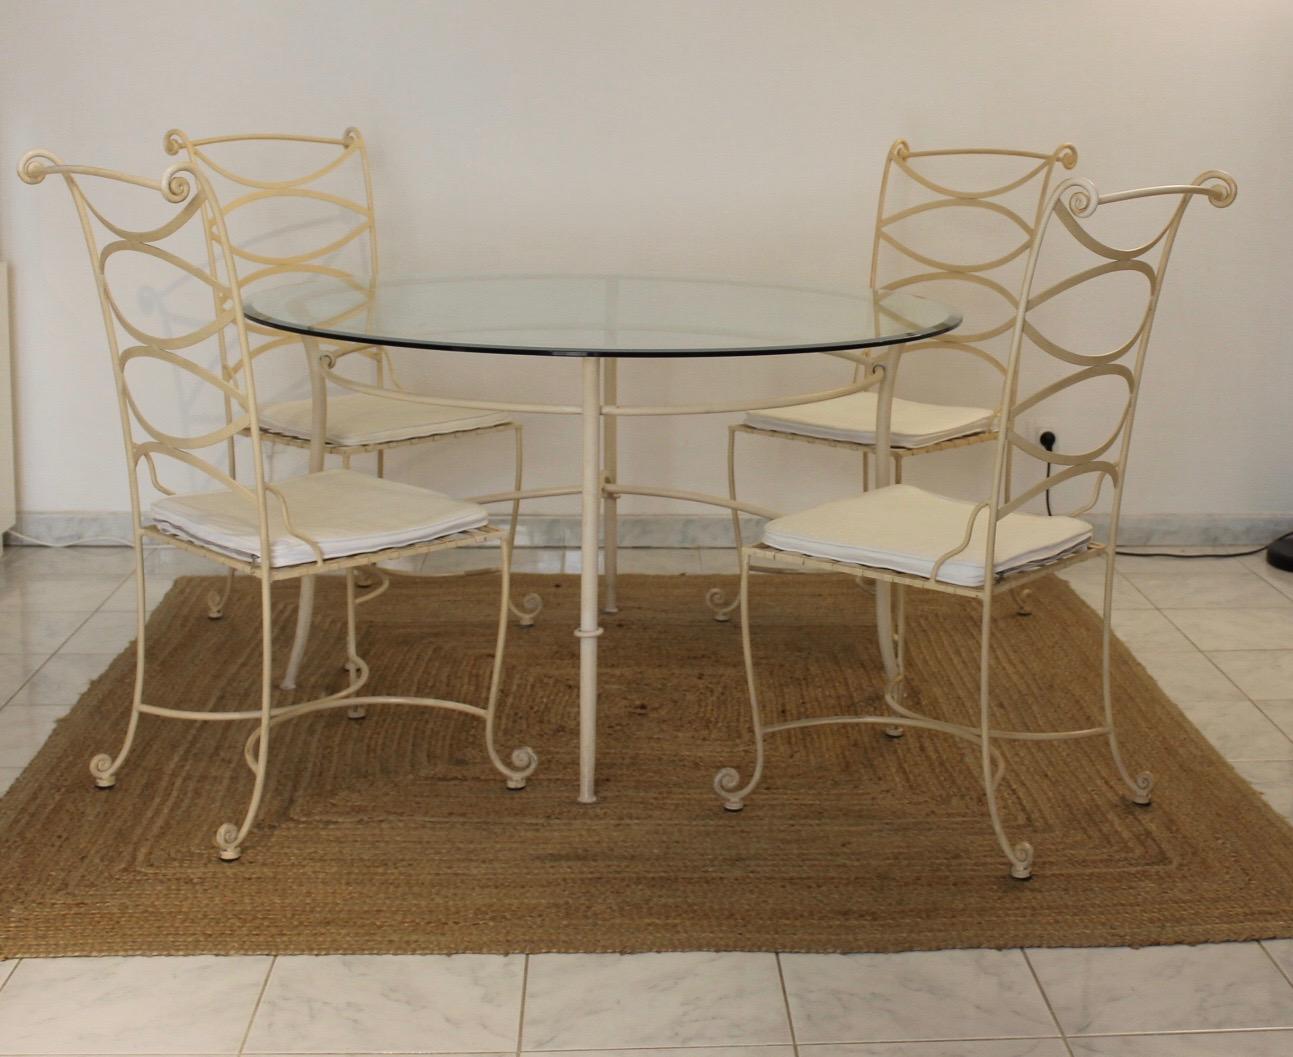 Dining table with 4 matching wrought iron chairs.
Ivory color. Can be suitable for the interior of a room or the exterior.
French work from the 80s of good quality.